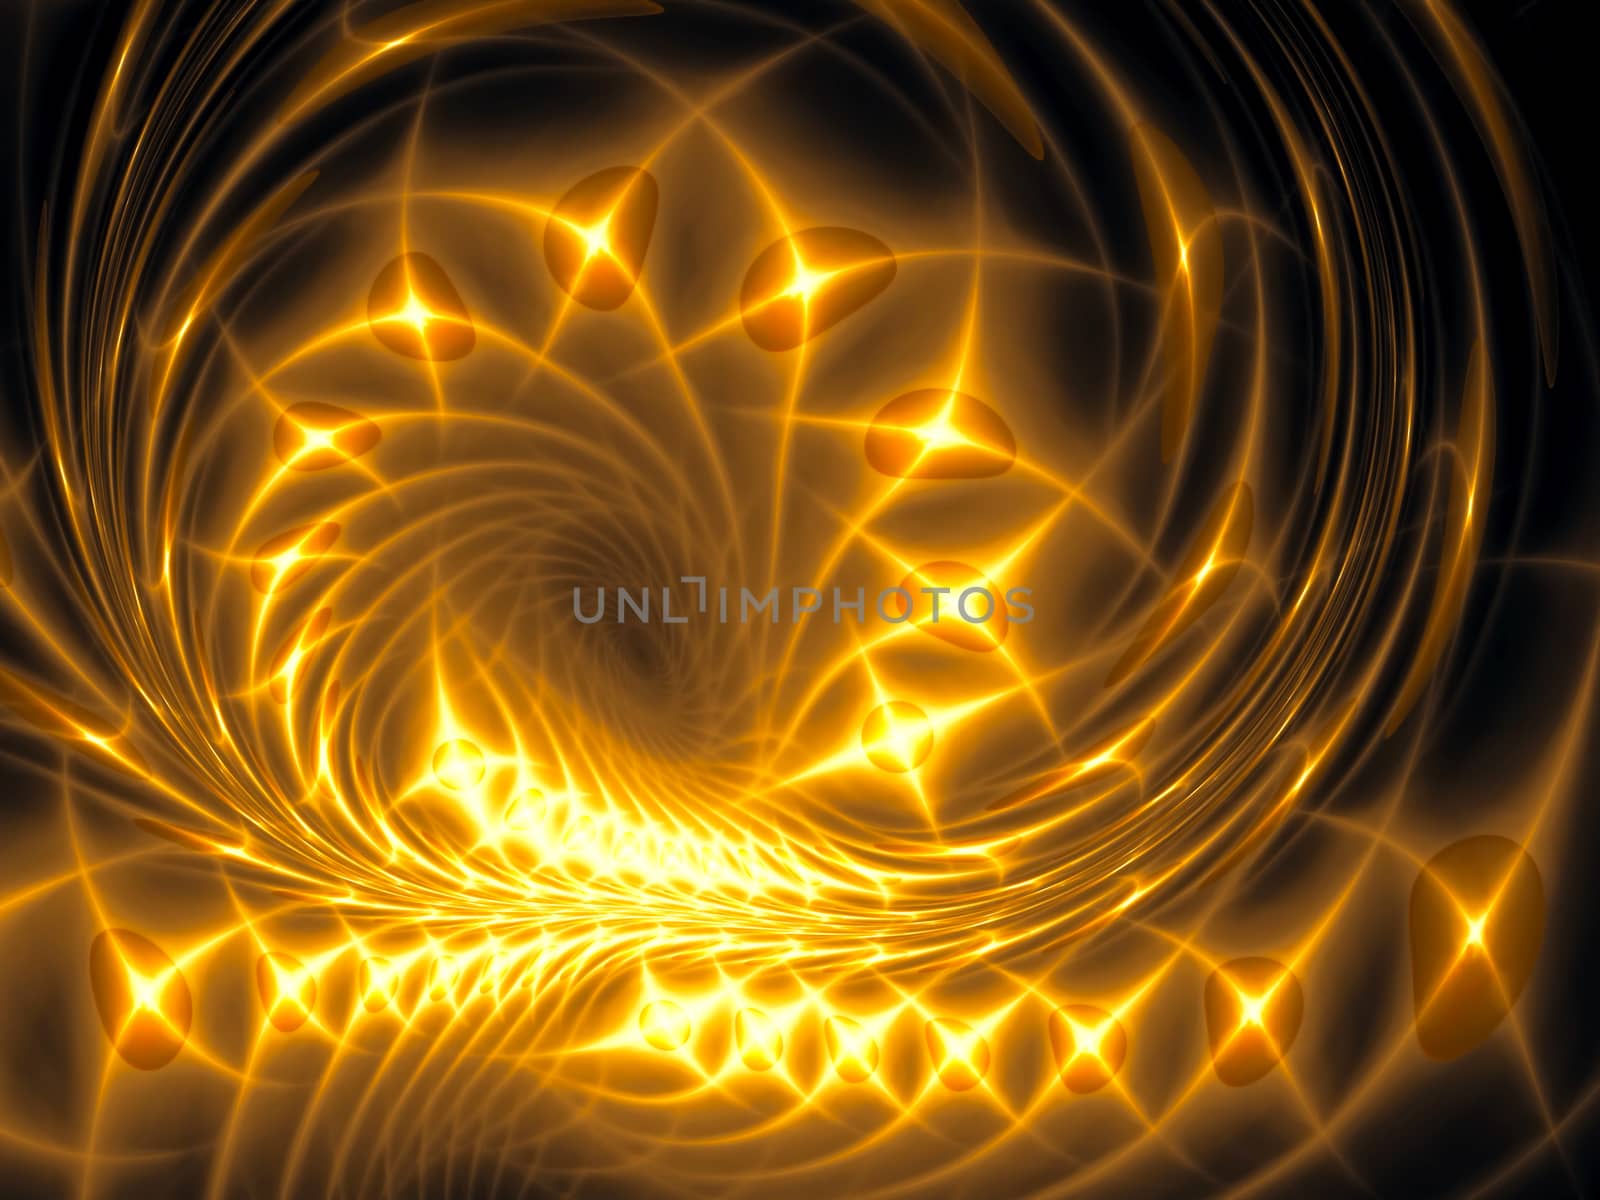 Abstract bright spiral - digitally generated image by olgasalt